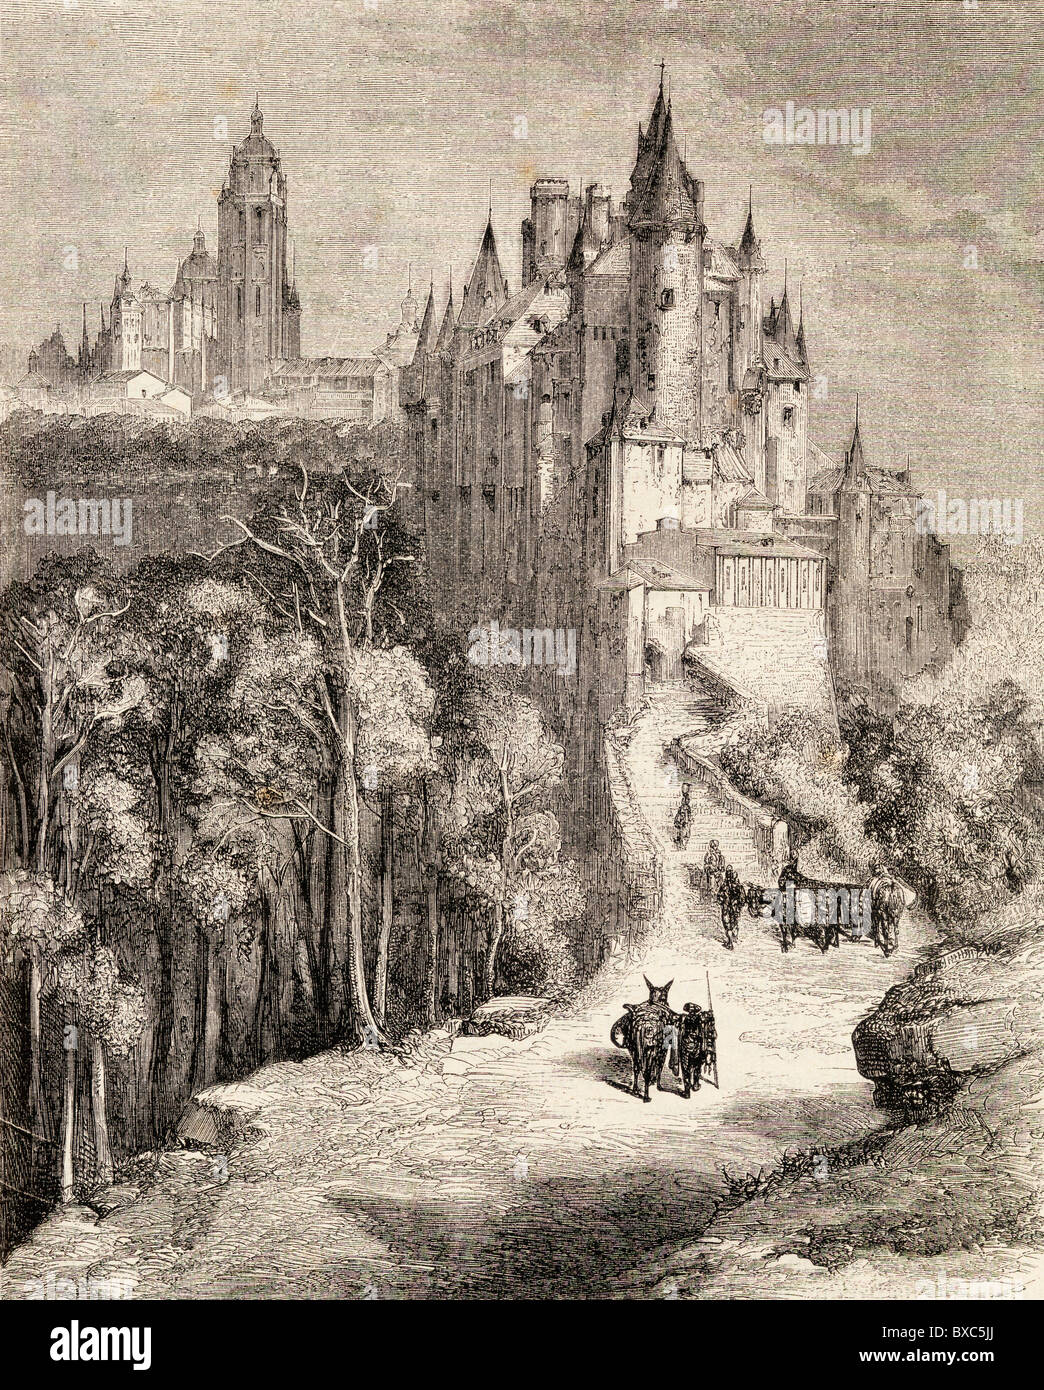 The Alcazar and cathedral, Segovia, Spain in the 19th century. Stock Photo